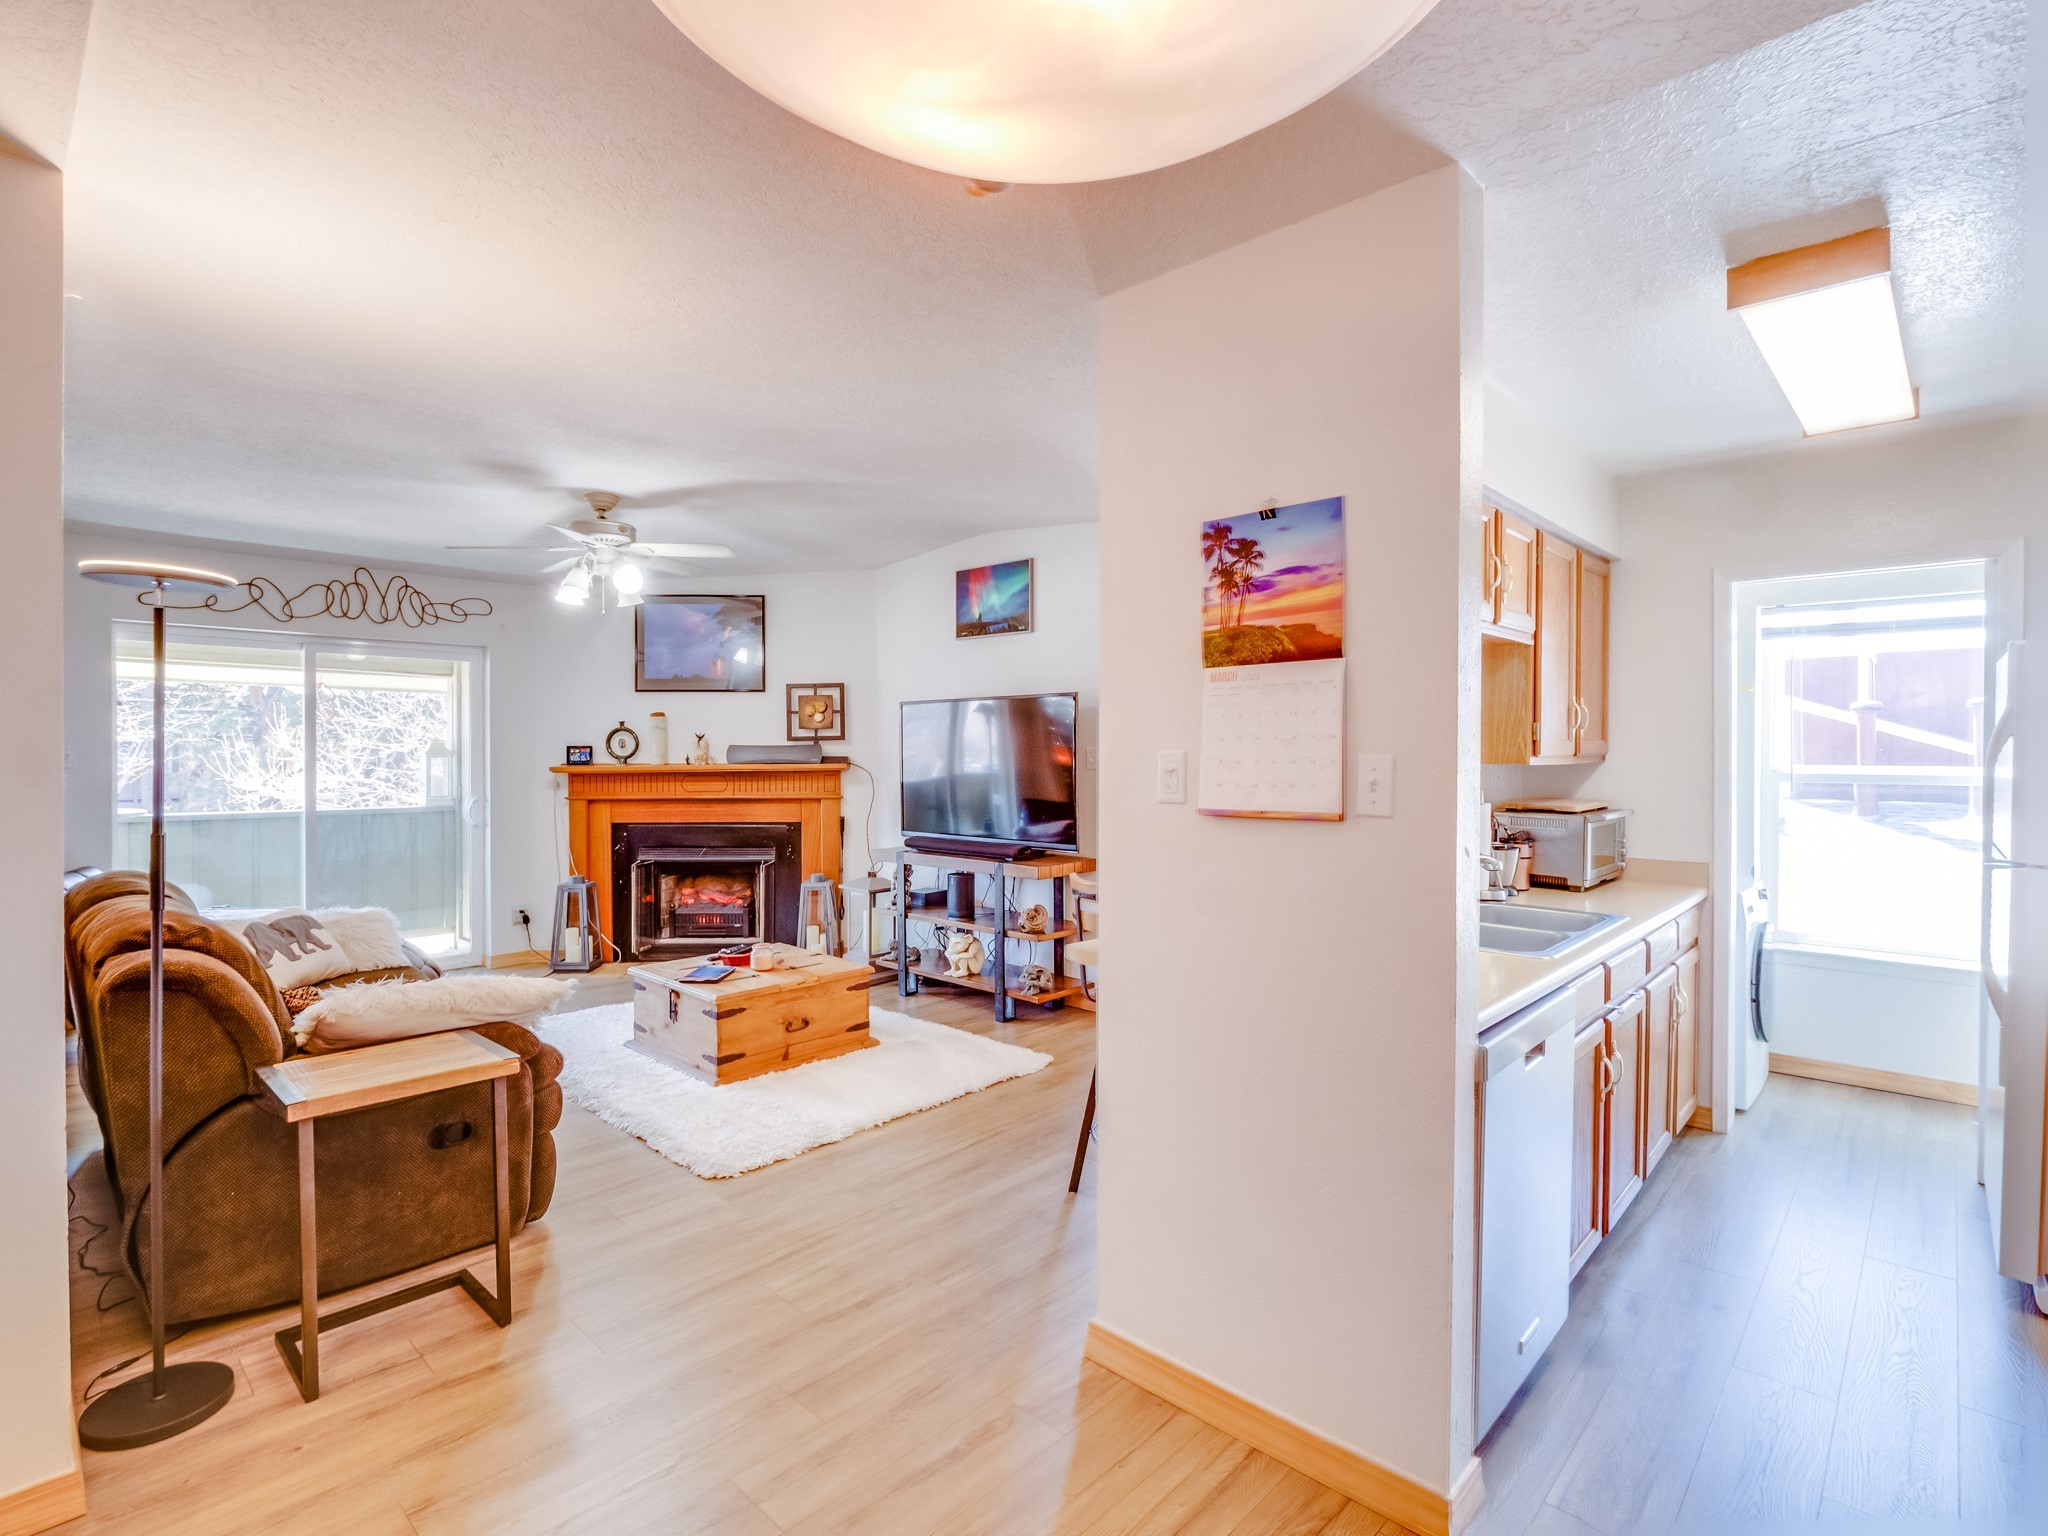 505 Oppenheimer Drive 310, Los Alamos, New Mexico 87544, 1 Bedroom Bedrooms, ,1 BathroomBathrooms,Residential,For Sale,505 Oppenheimer Drive 310,202336310